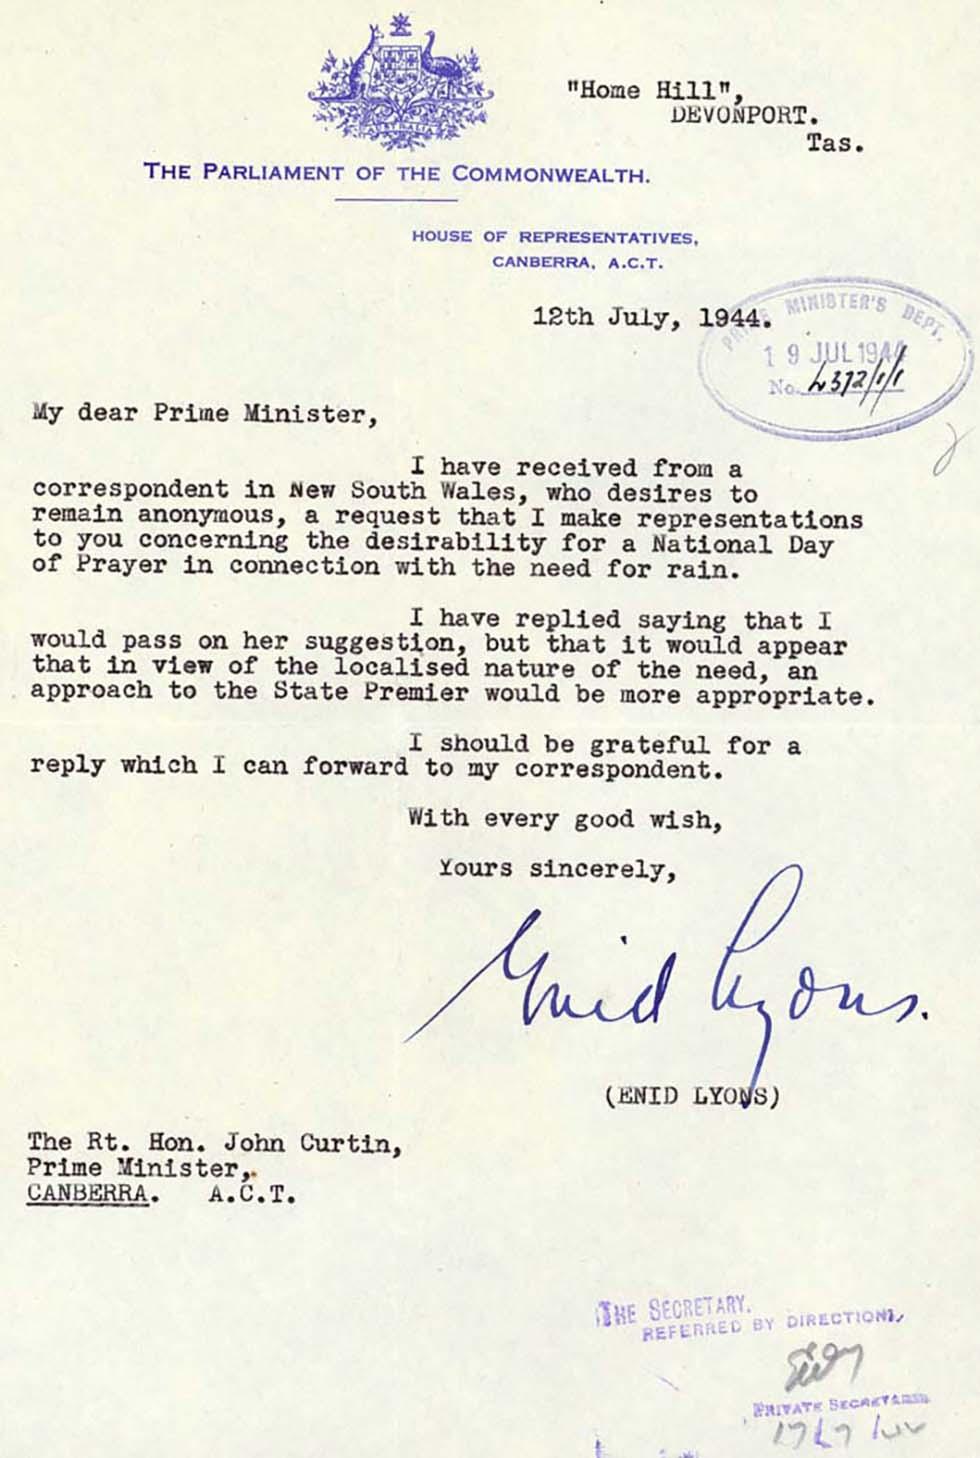 Letter to Prime Minister John Curtin from Enid Lyons about a Day of Prayer for rain.